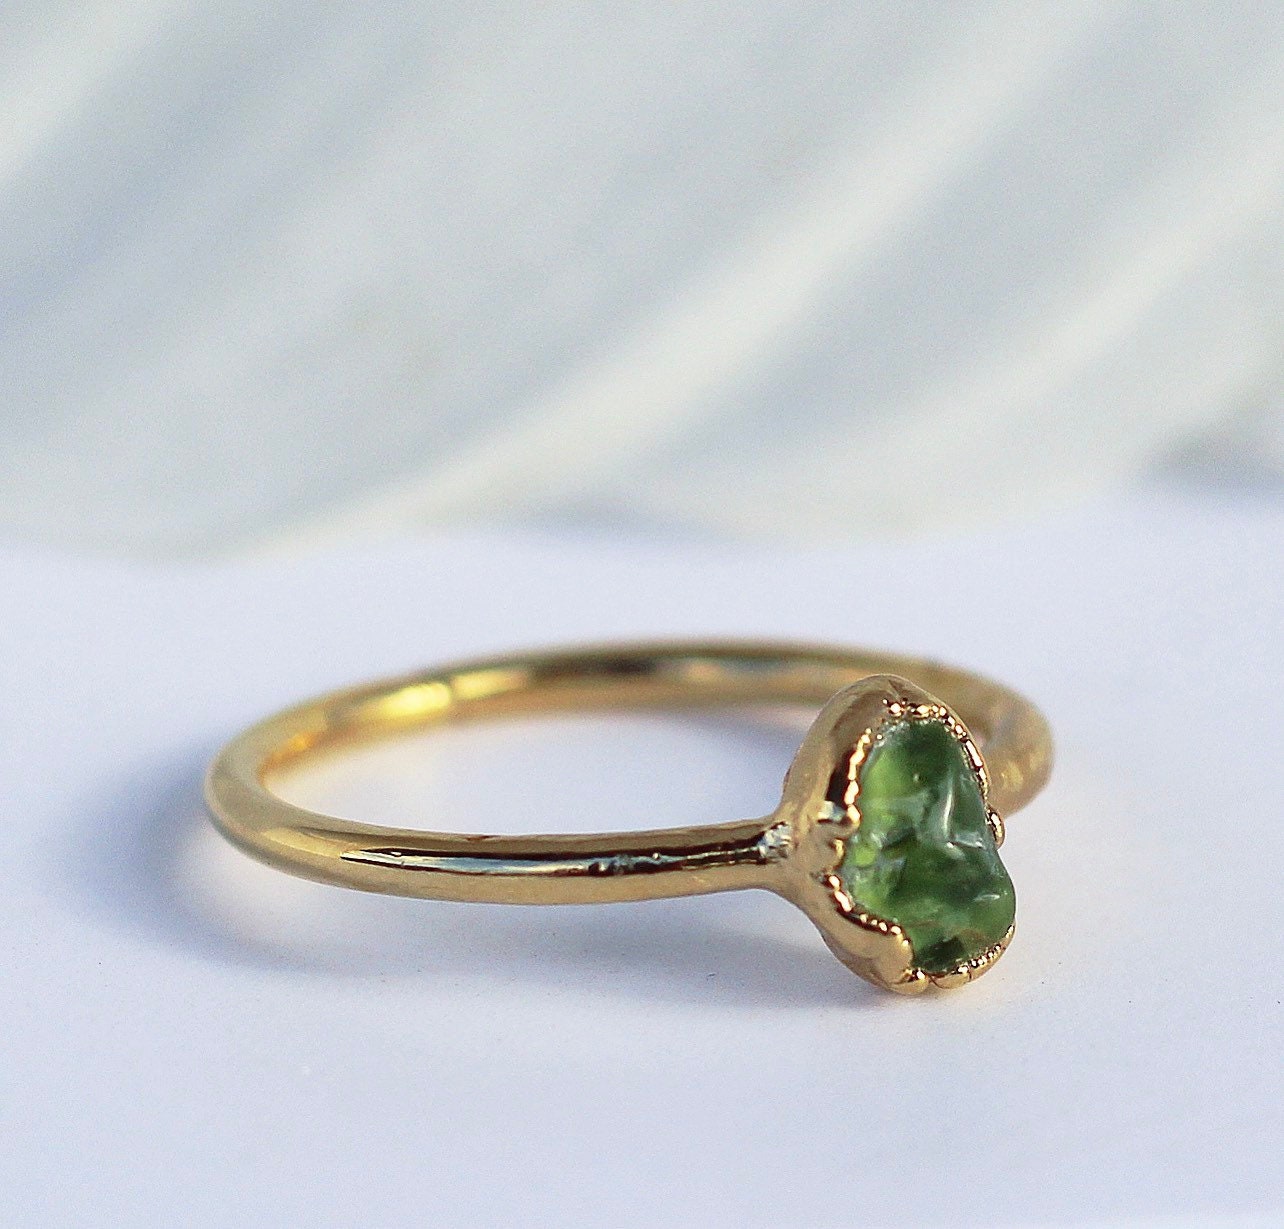 Raw Peridot Ring in Gold, August Birthstone Gold Ring, Raw Green Stone Ring, August Birthstone Gift, August Gift for Her, Birthstone Crystal